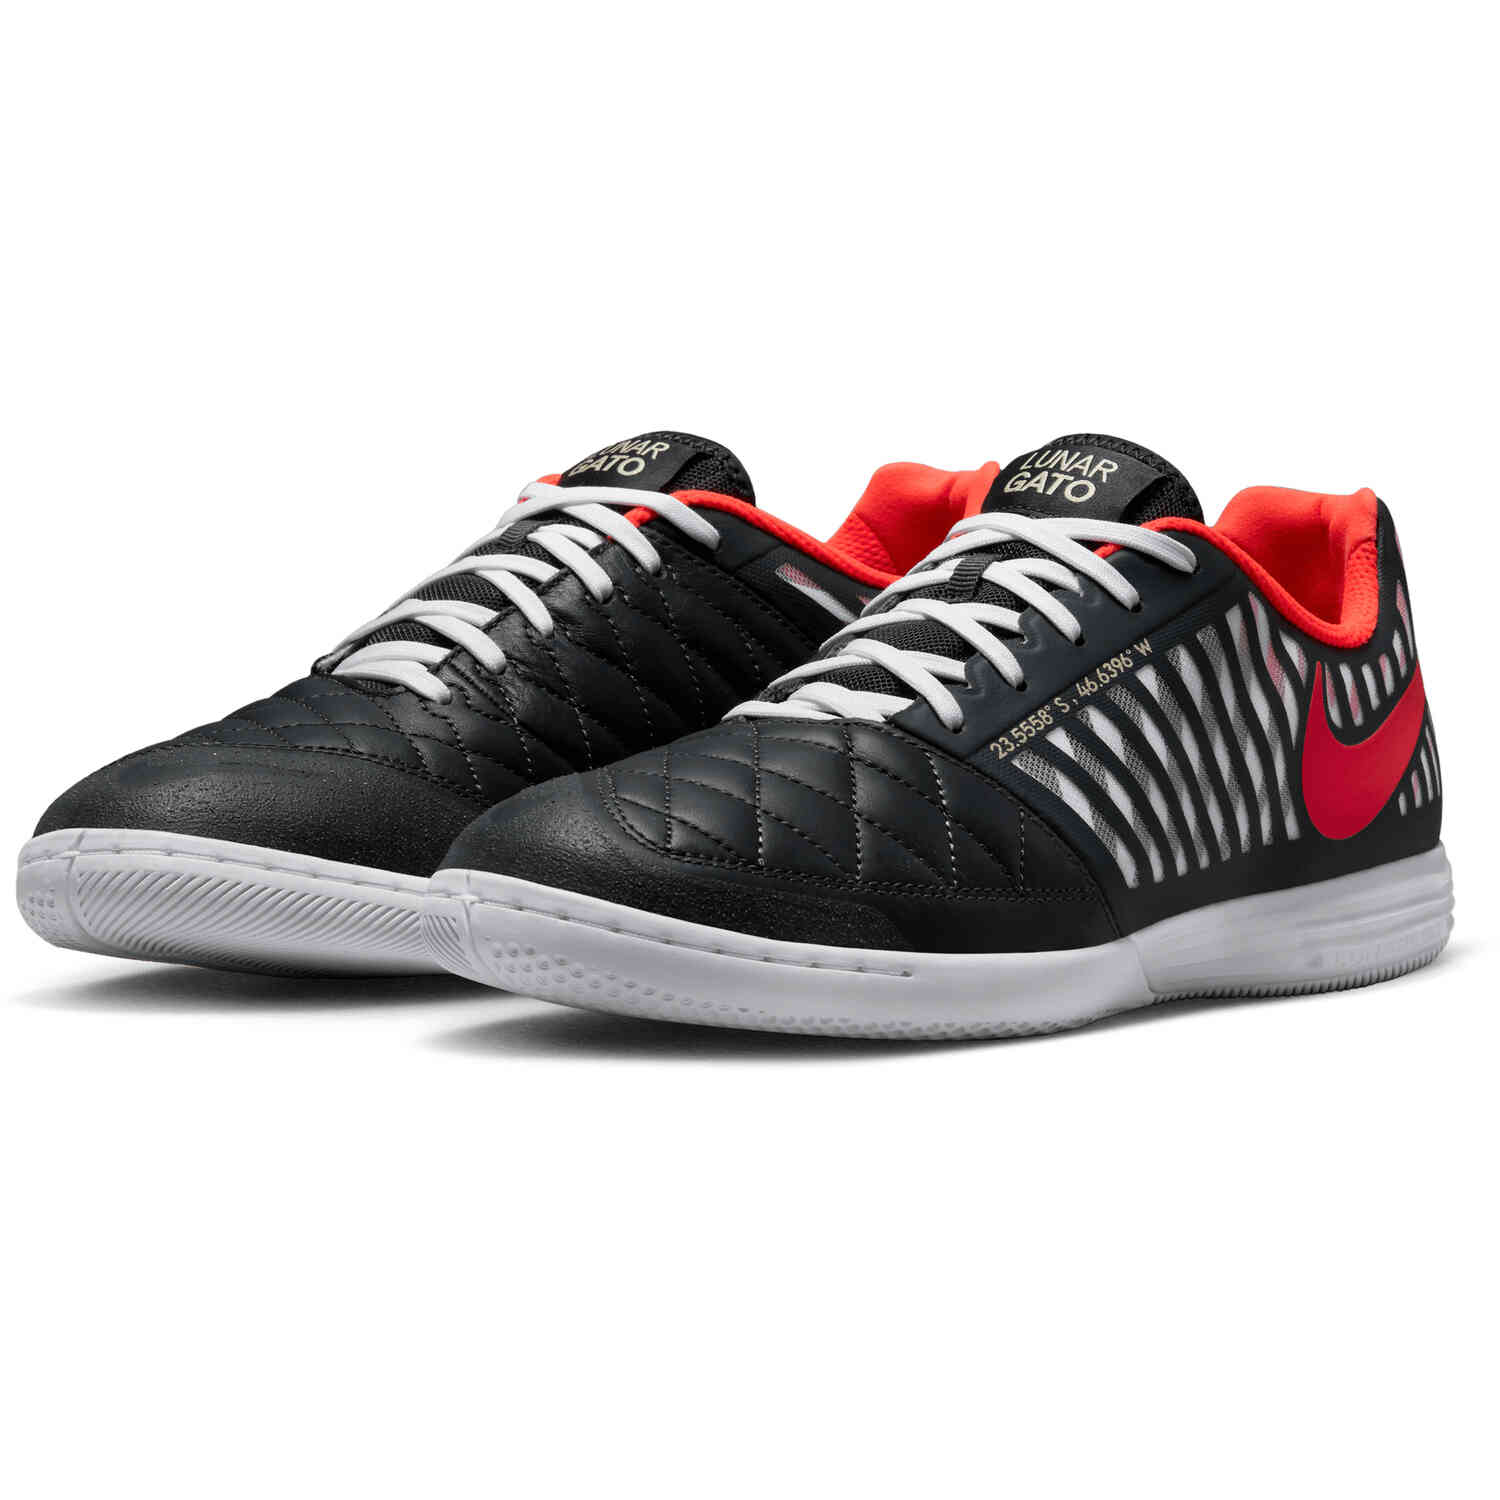 Persona a cargo del juego deportivo Kakadu Bajar Nike Lunargato II IC - Anthracite & Infrared 23 with White with Team Gold -  SoccerPro